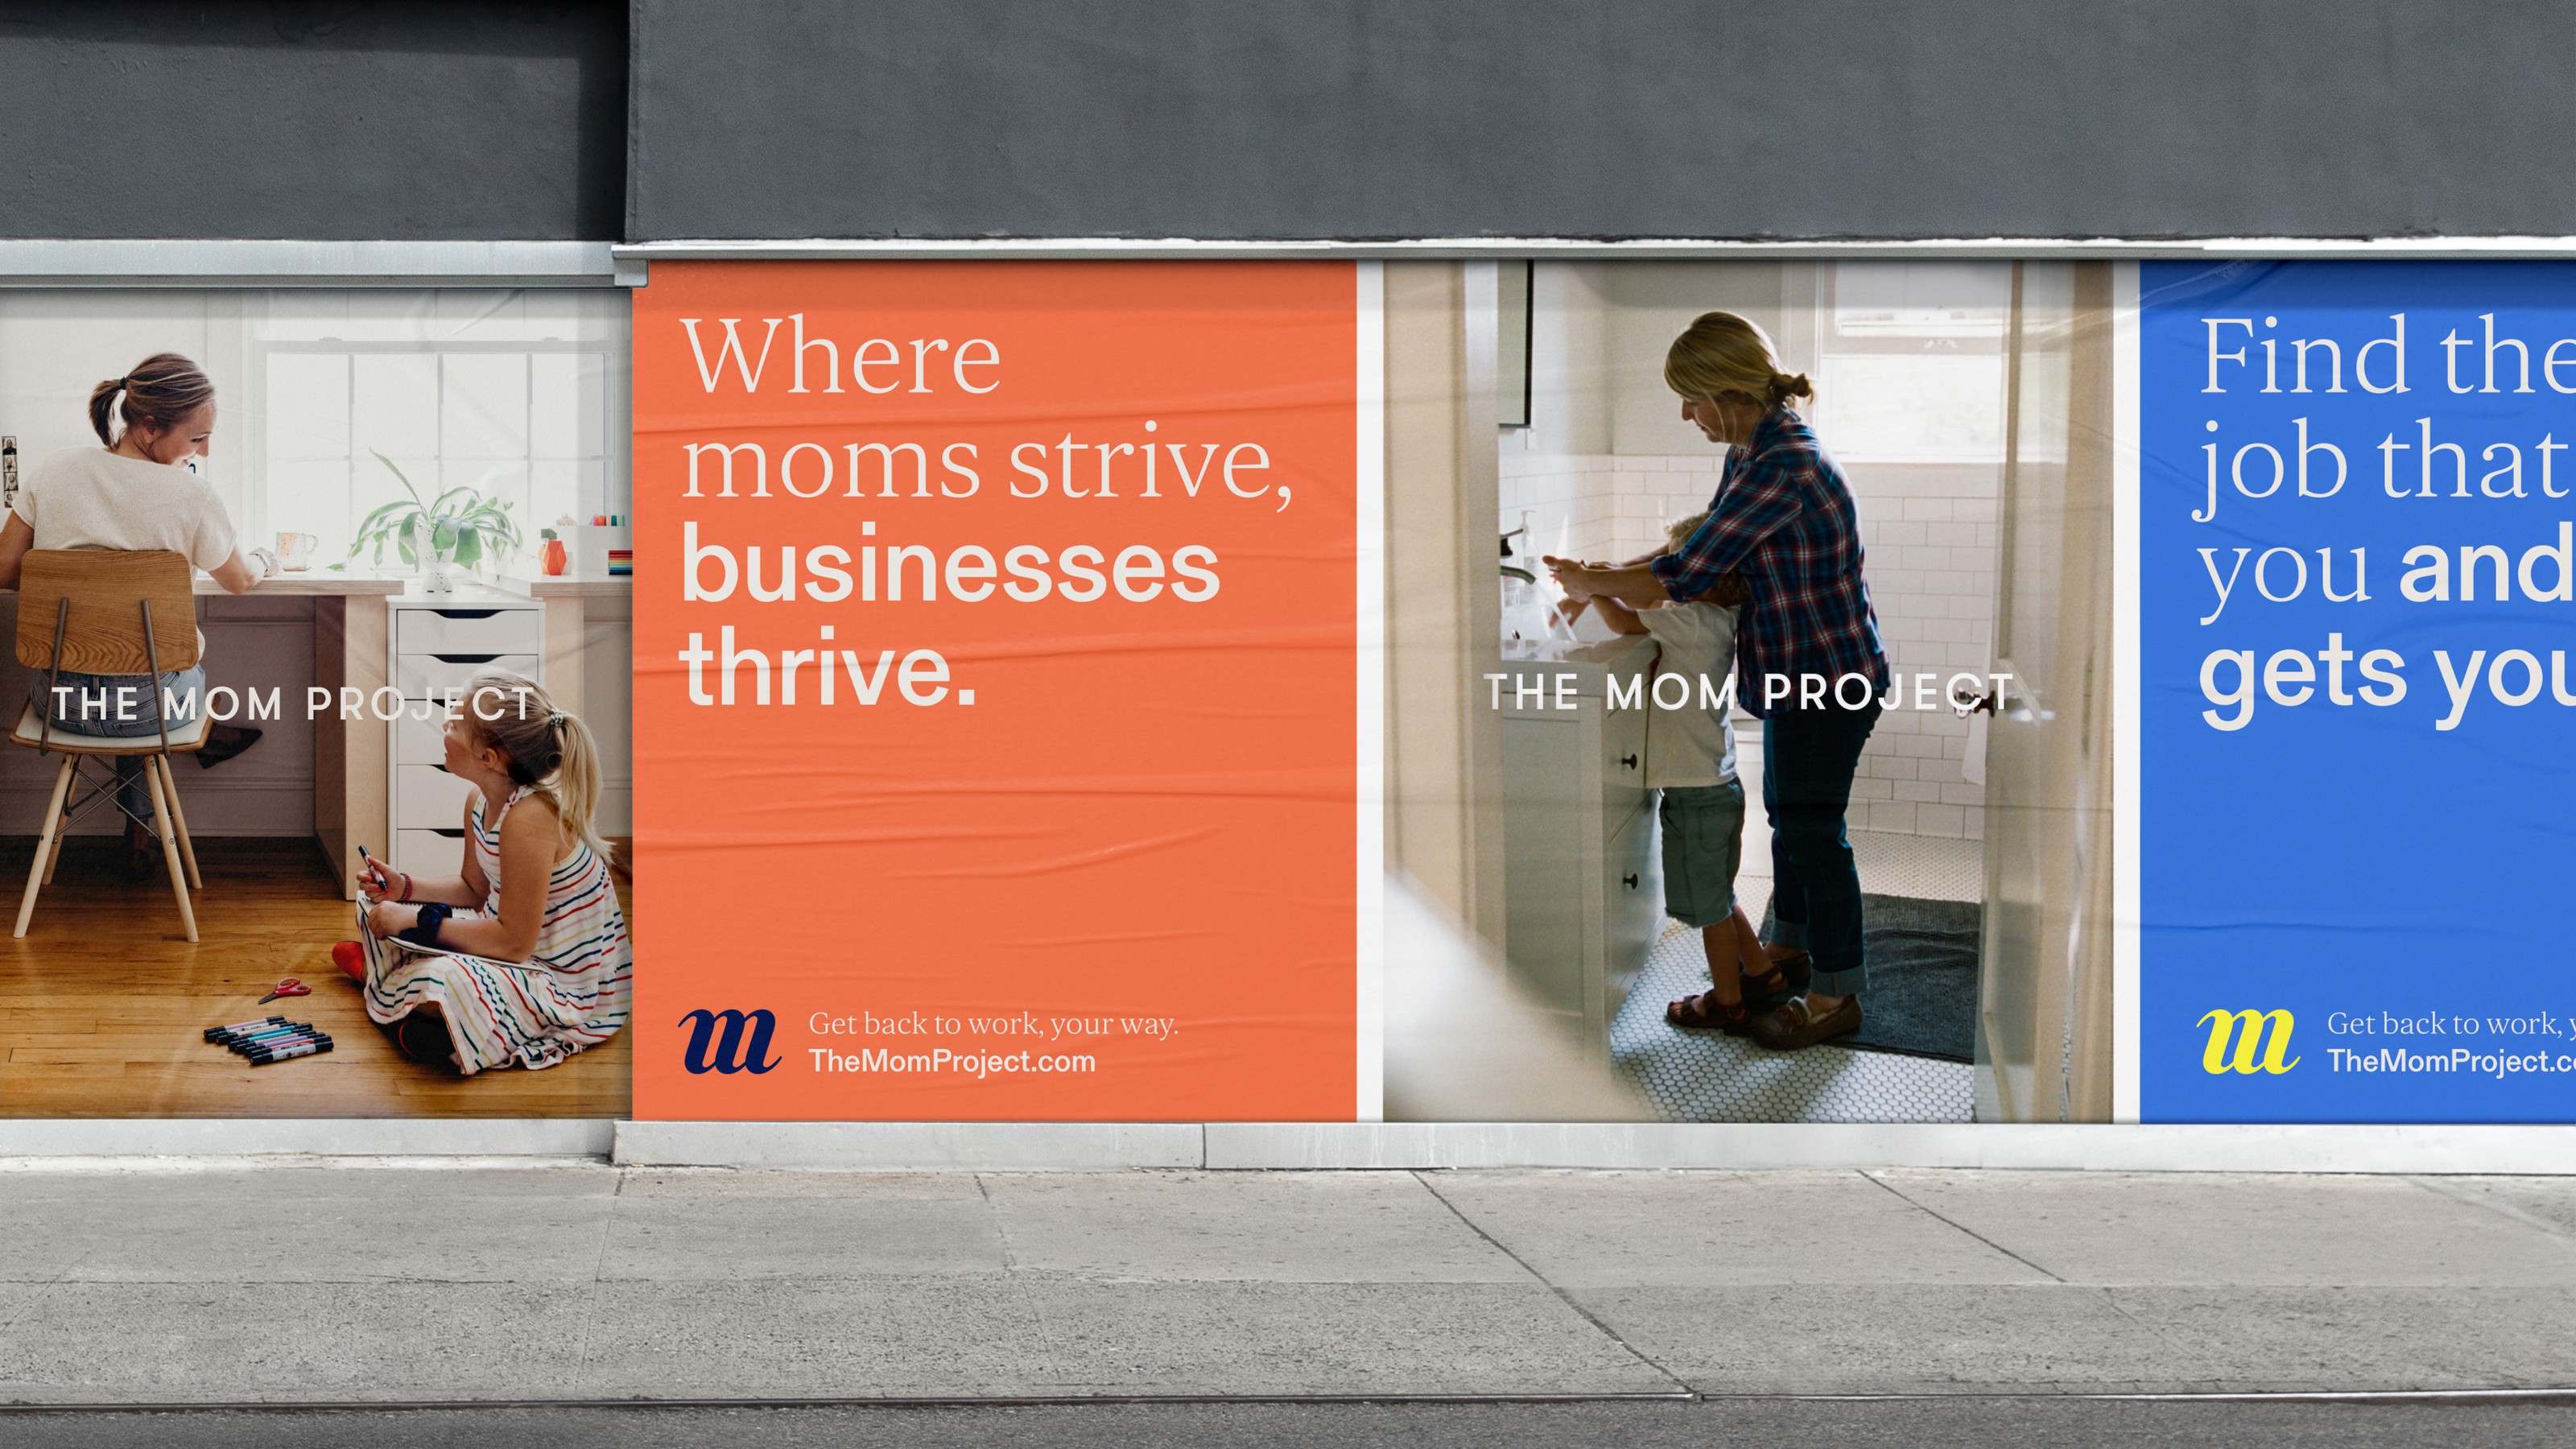 outdoor ad with images of moms that reads “where moms strive, businesses thrive”